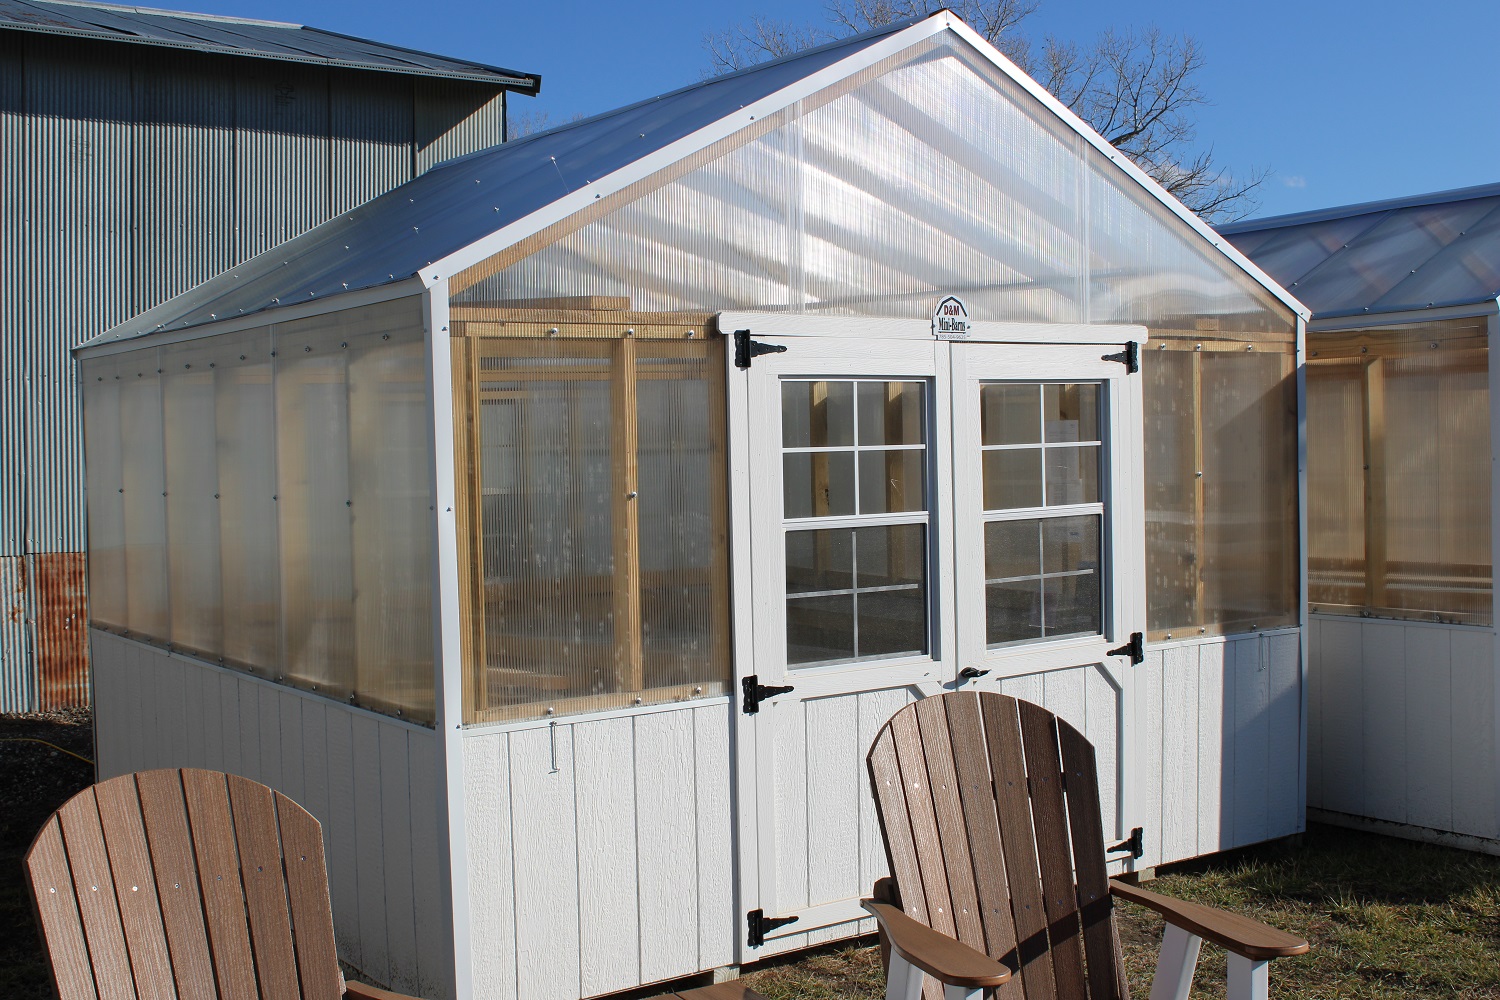 Golf Simulator Shed Plans - Projective Portable Buildings